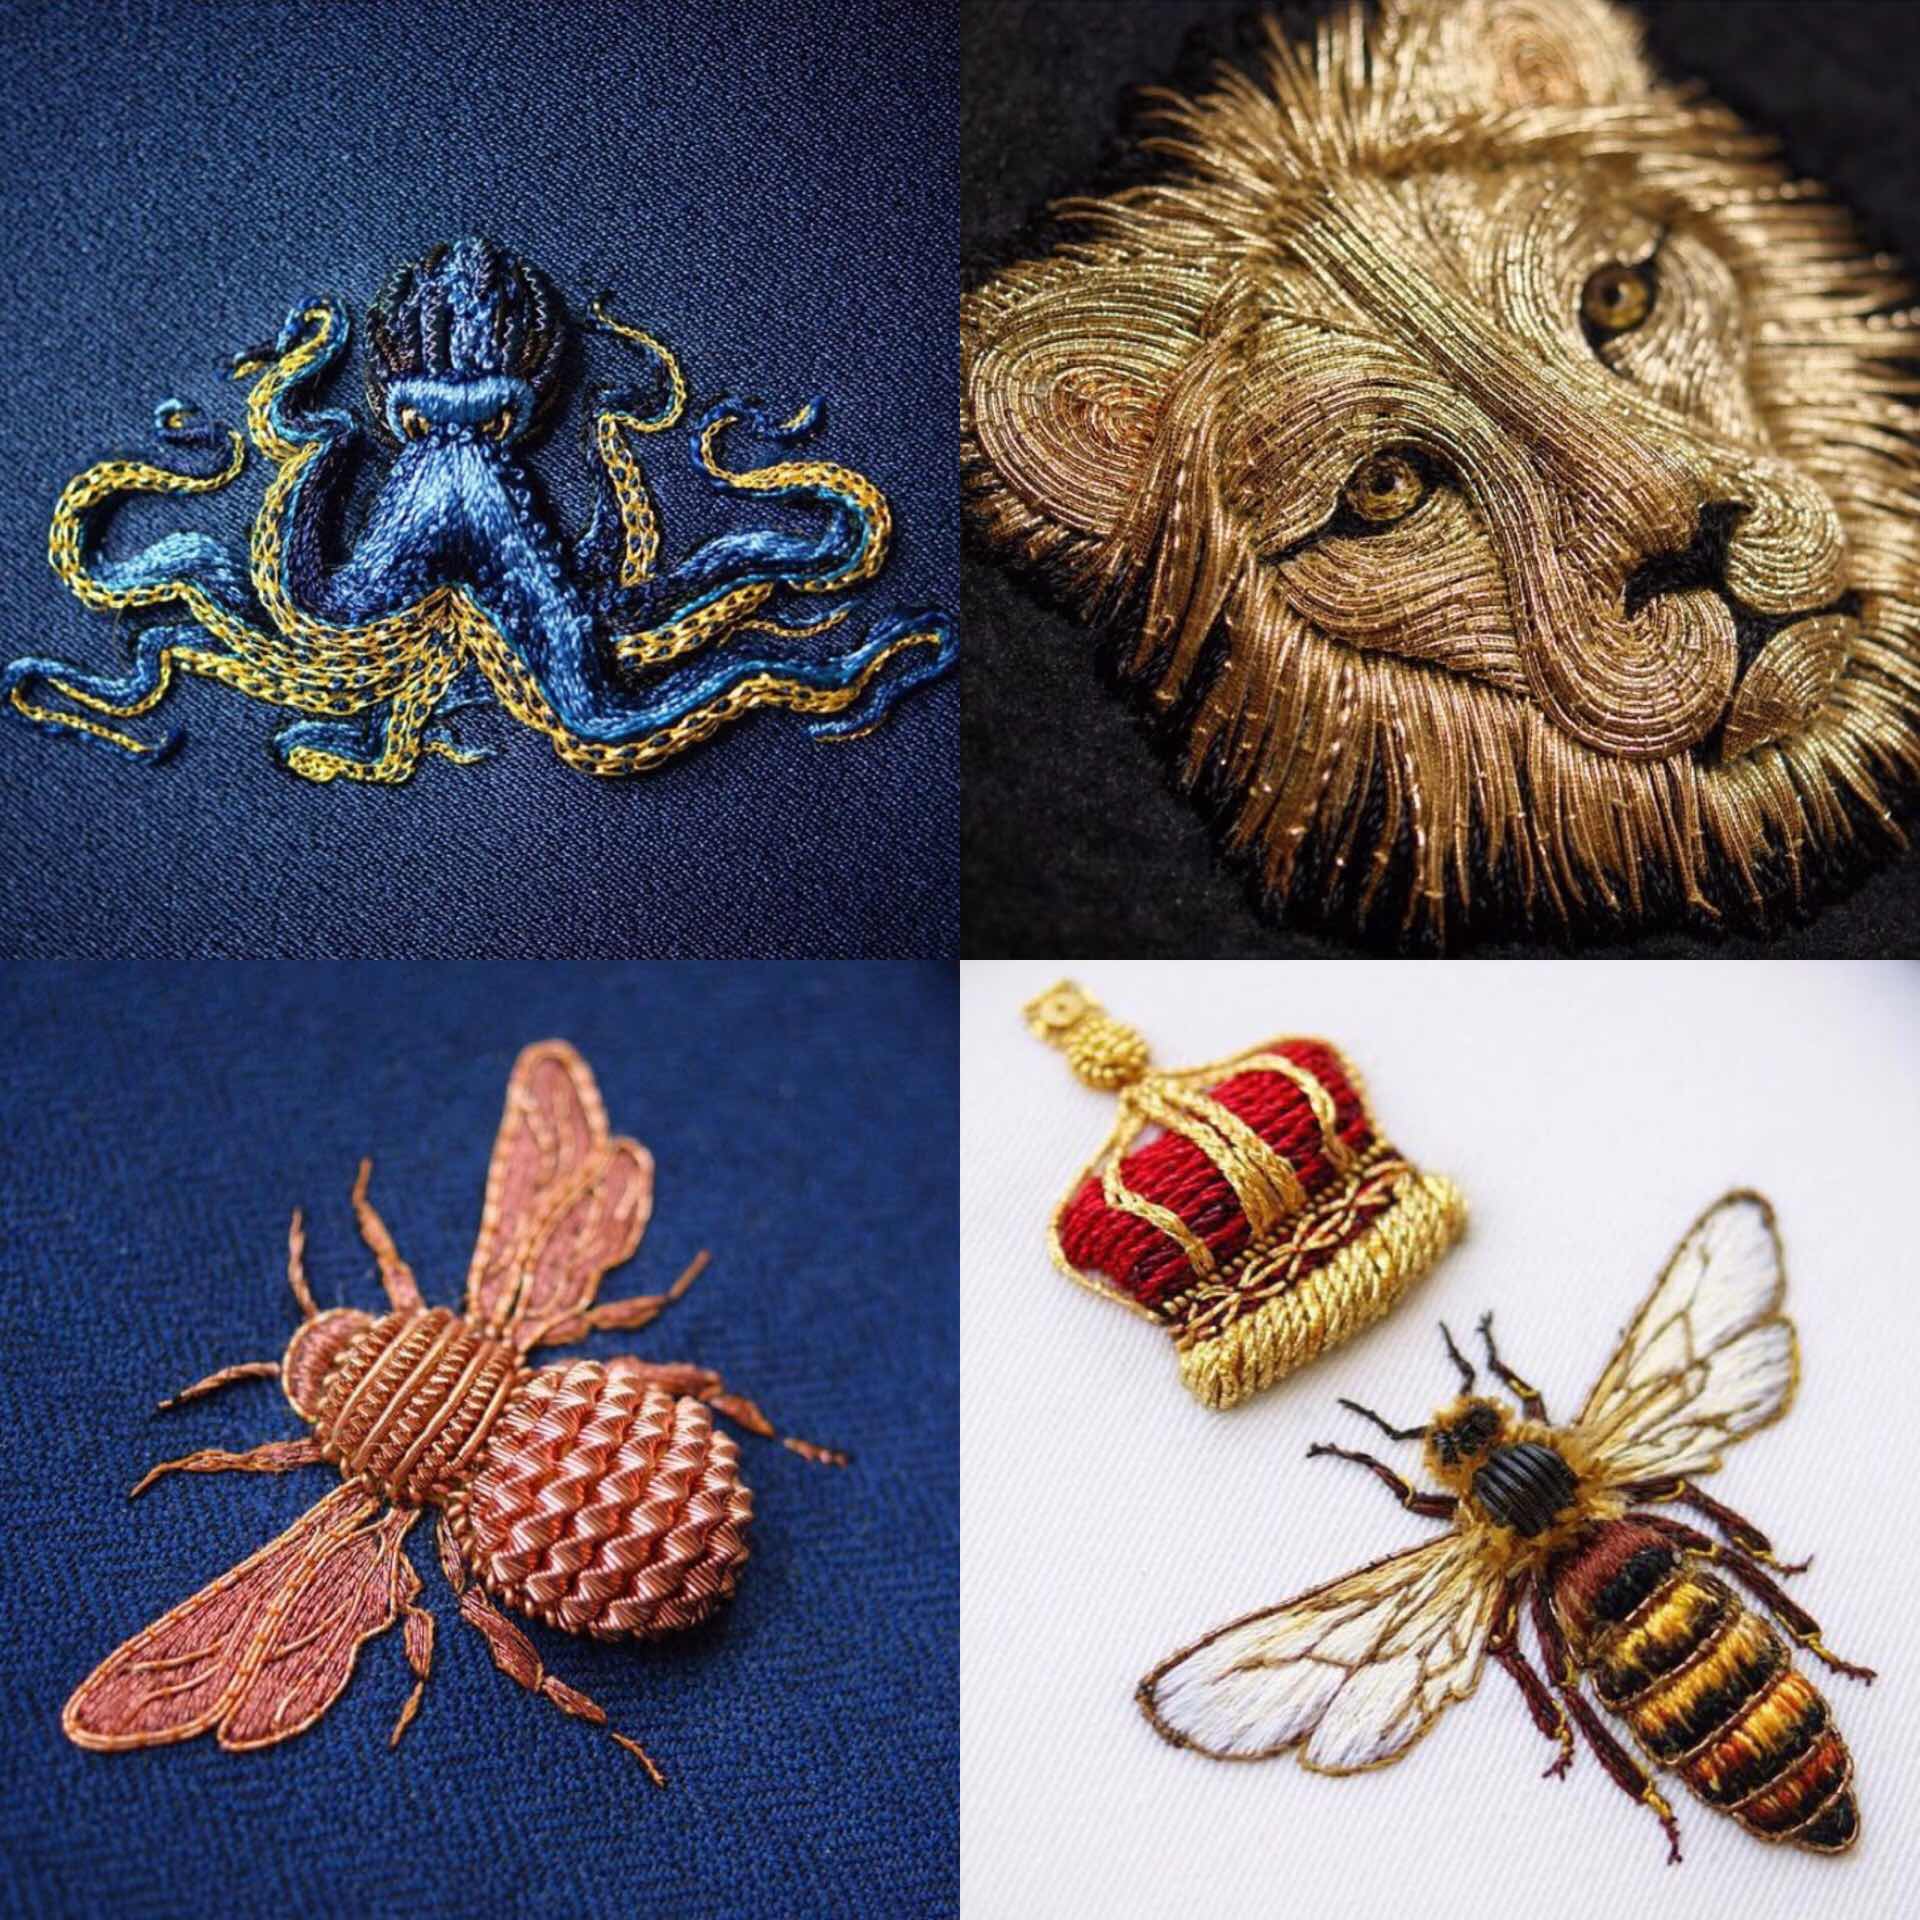 quality-linkage-hand-embroidered-creatures-laura-braverstock